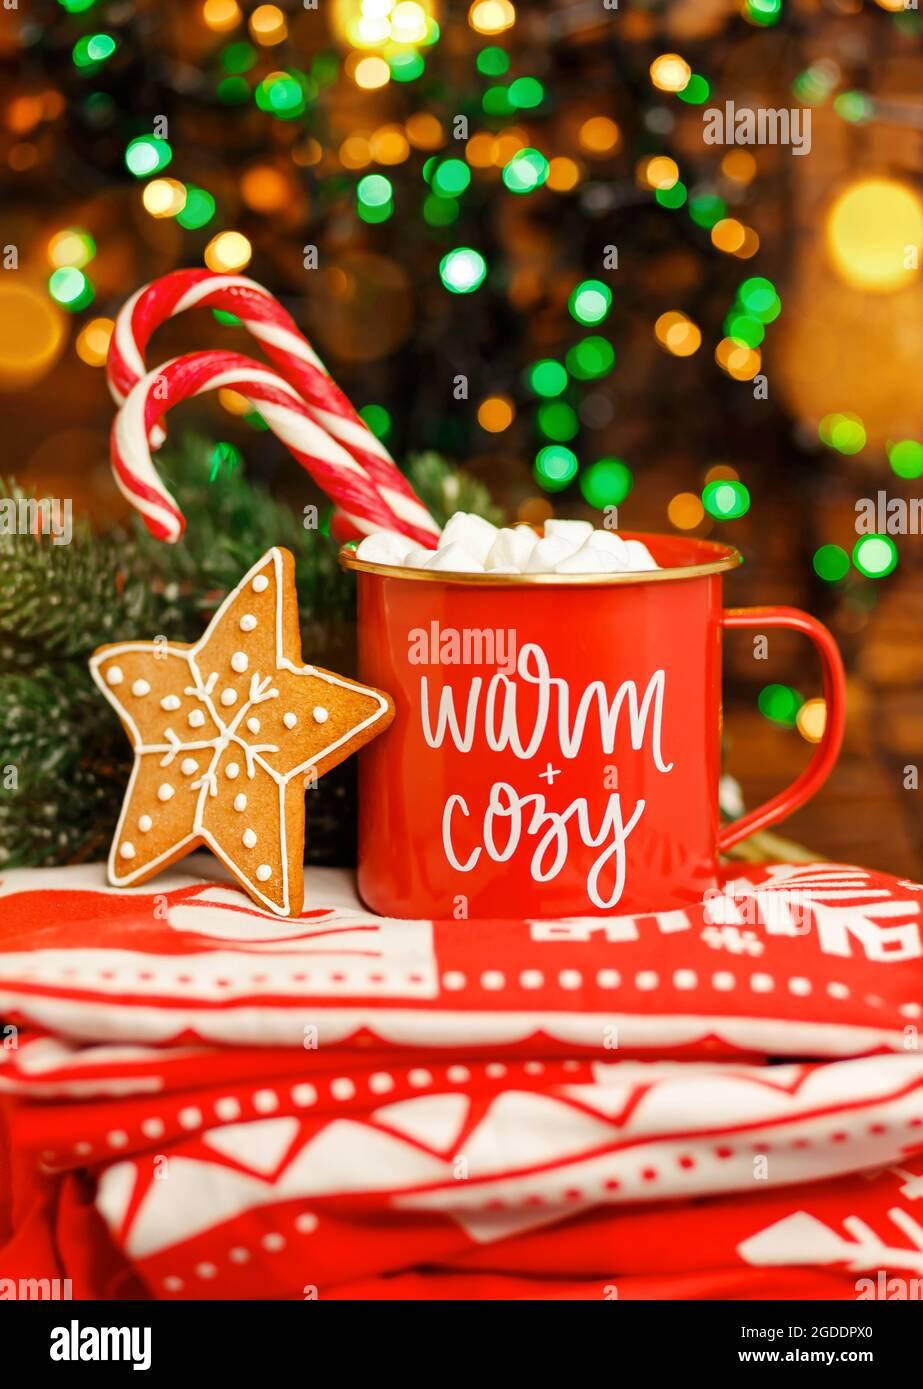 Hot Chocolate Infront Xmas Tree Merry Christmas Greeting Card